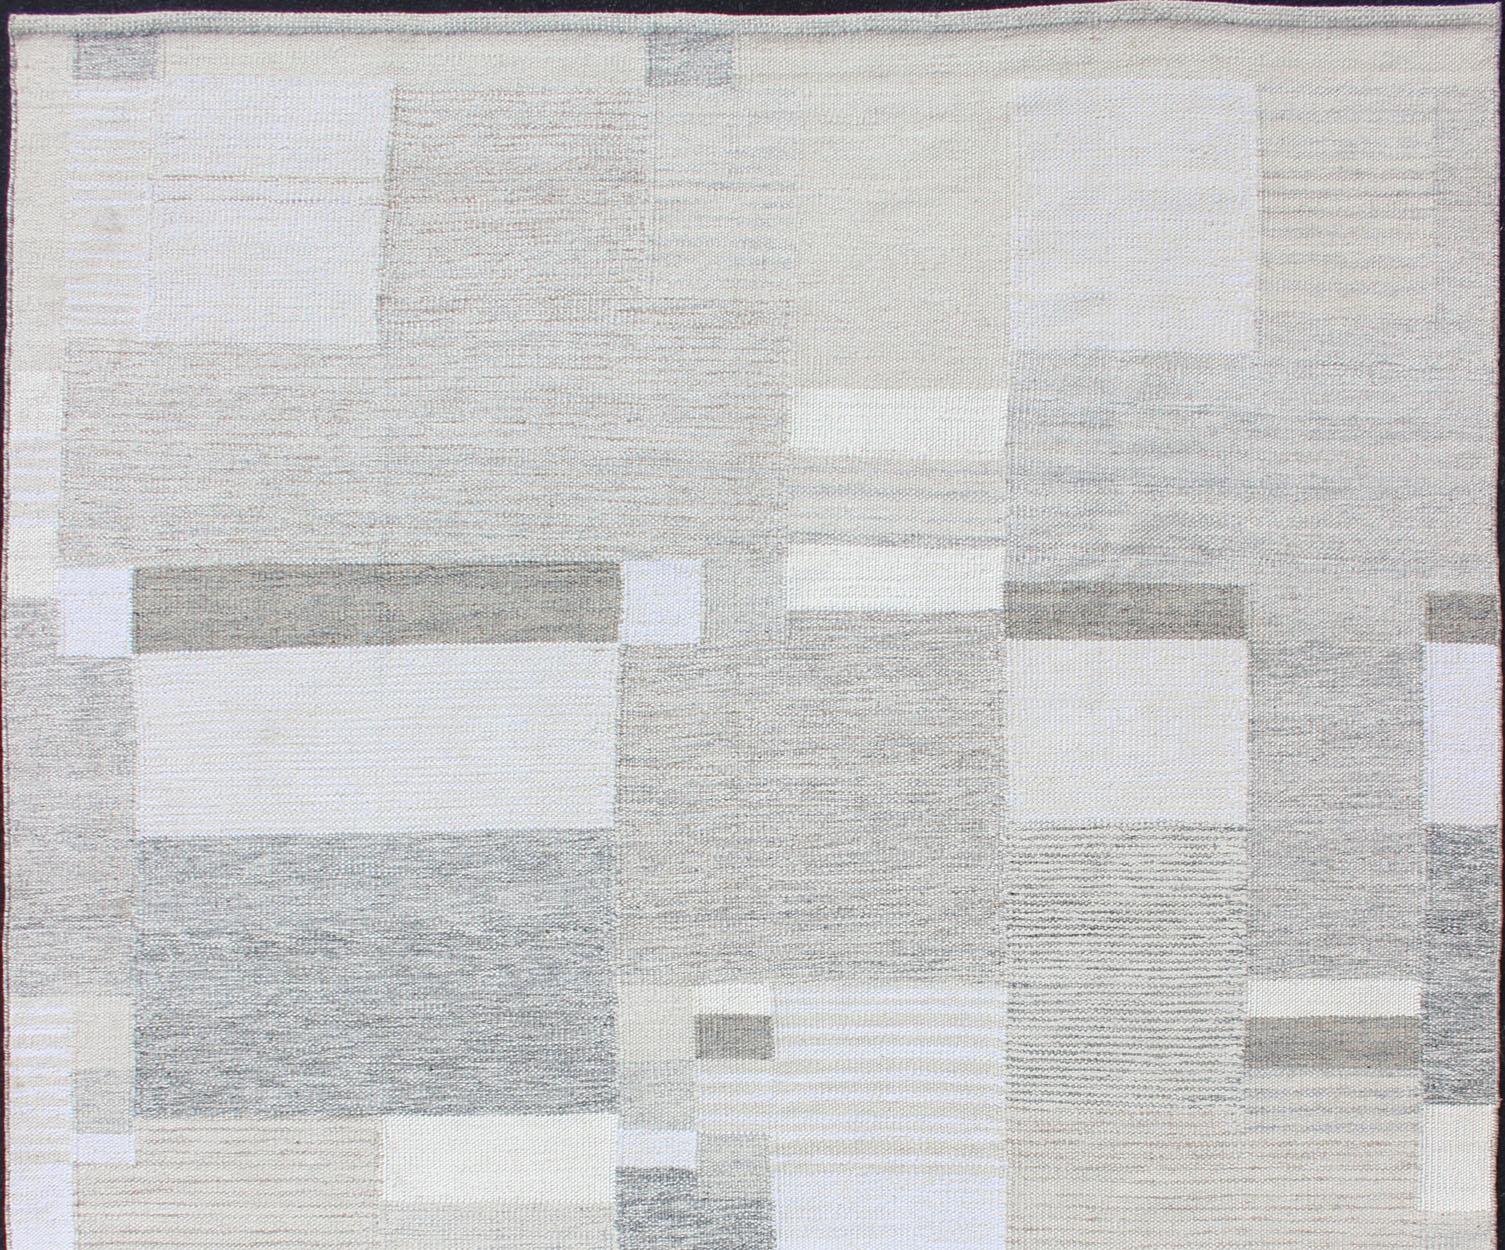 Gray, beige, light brown, white and cream modern design Scandinavian style flat-weave rug, rug KHN-1037-SW-08, country of origin / type: India / Scandinavian flat-weave.

This Scandinavian flat-weave style is inspired by the work of Swedish textile